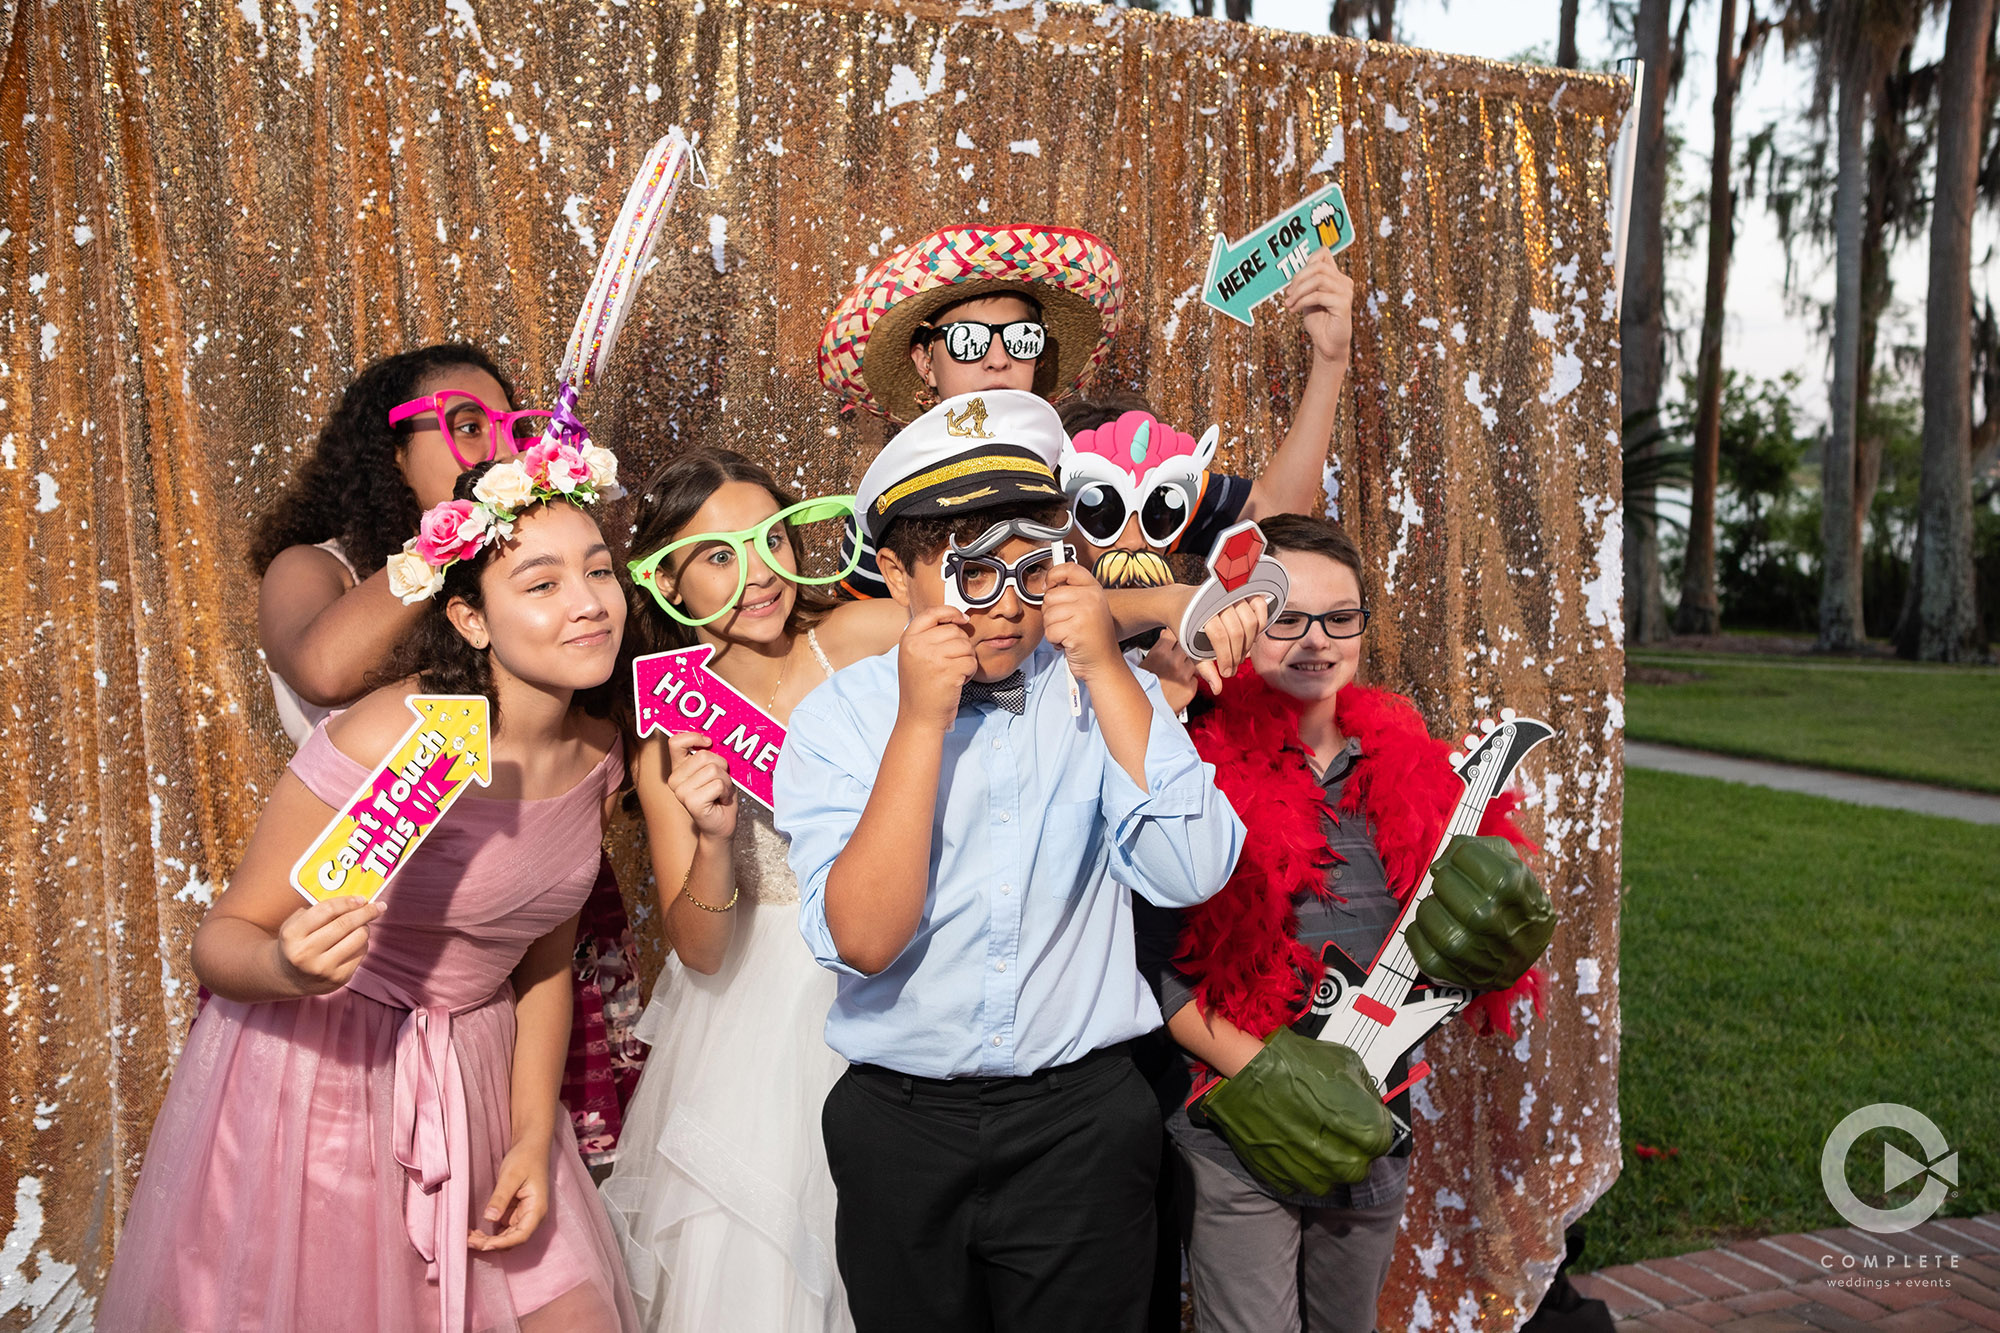 start-the-party-with-a-photo-booth-complete-weddings-melbourne-fl